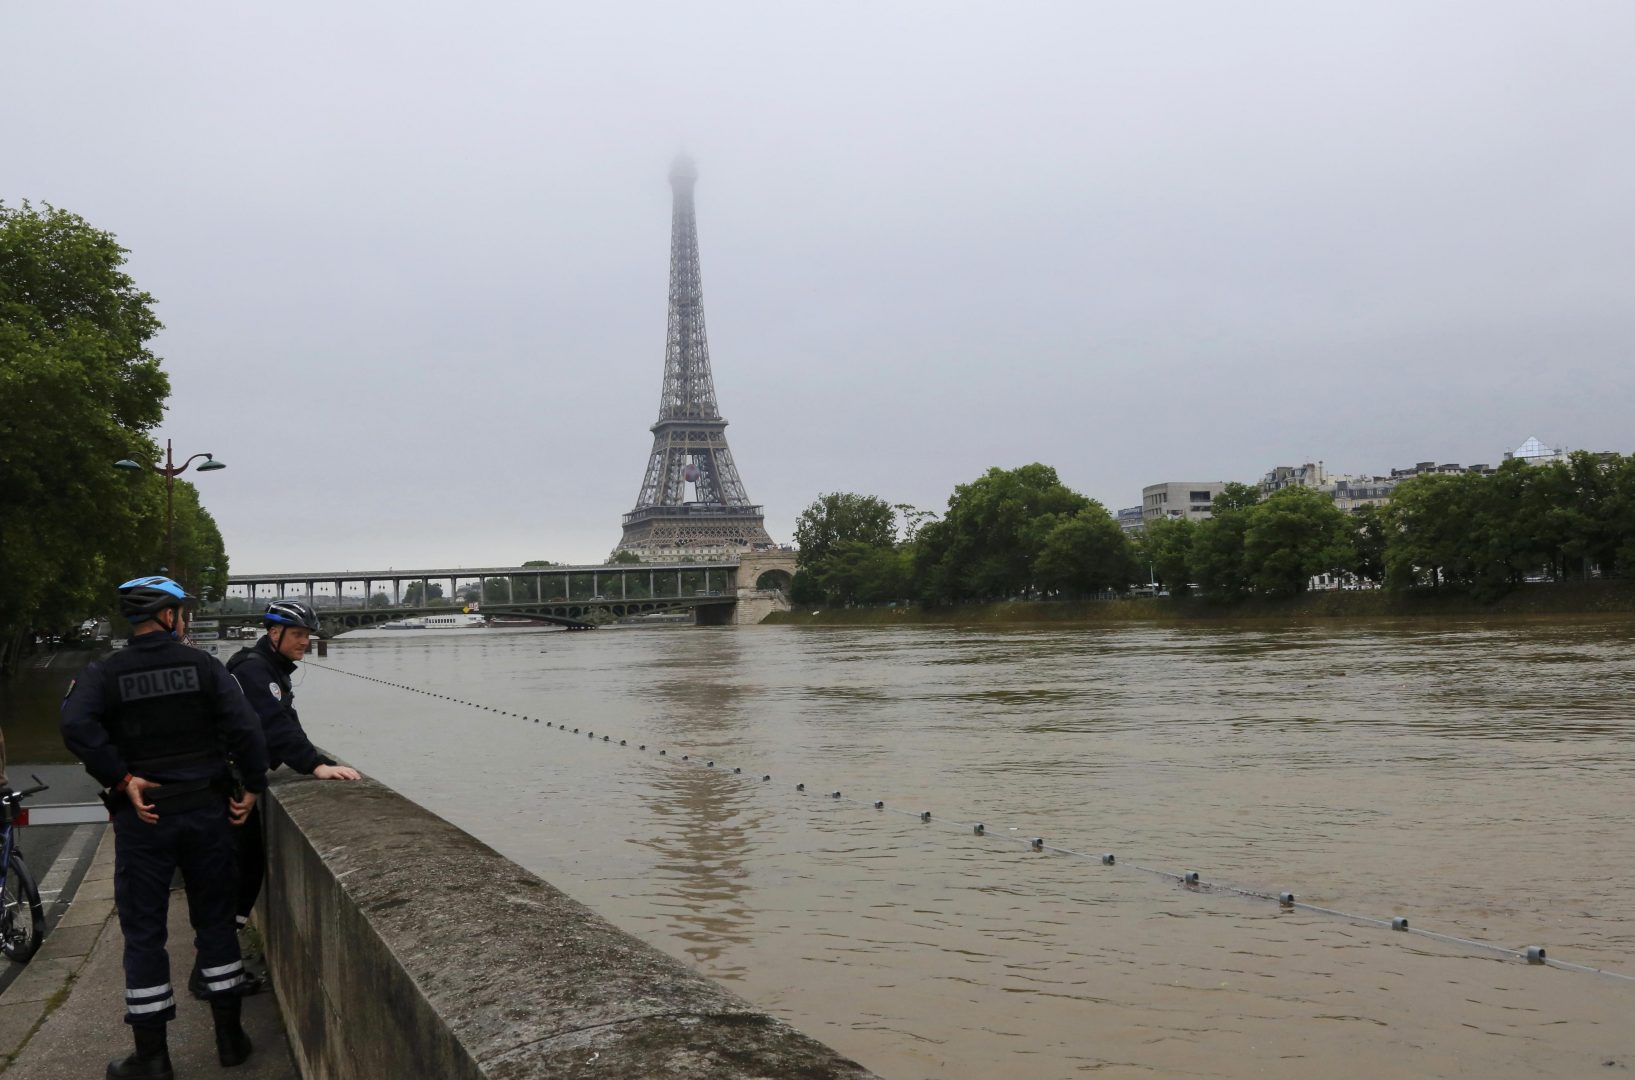 French police stop to look at flooding on the banks of the Seine River near the Eiffel Tower after days of heavy rainfall in Paris, France, June 2, 2016. REUTERS/Jacky Naegelen